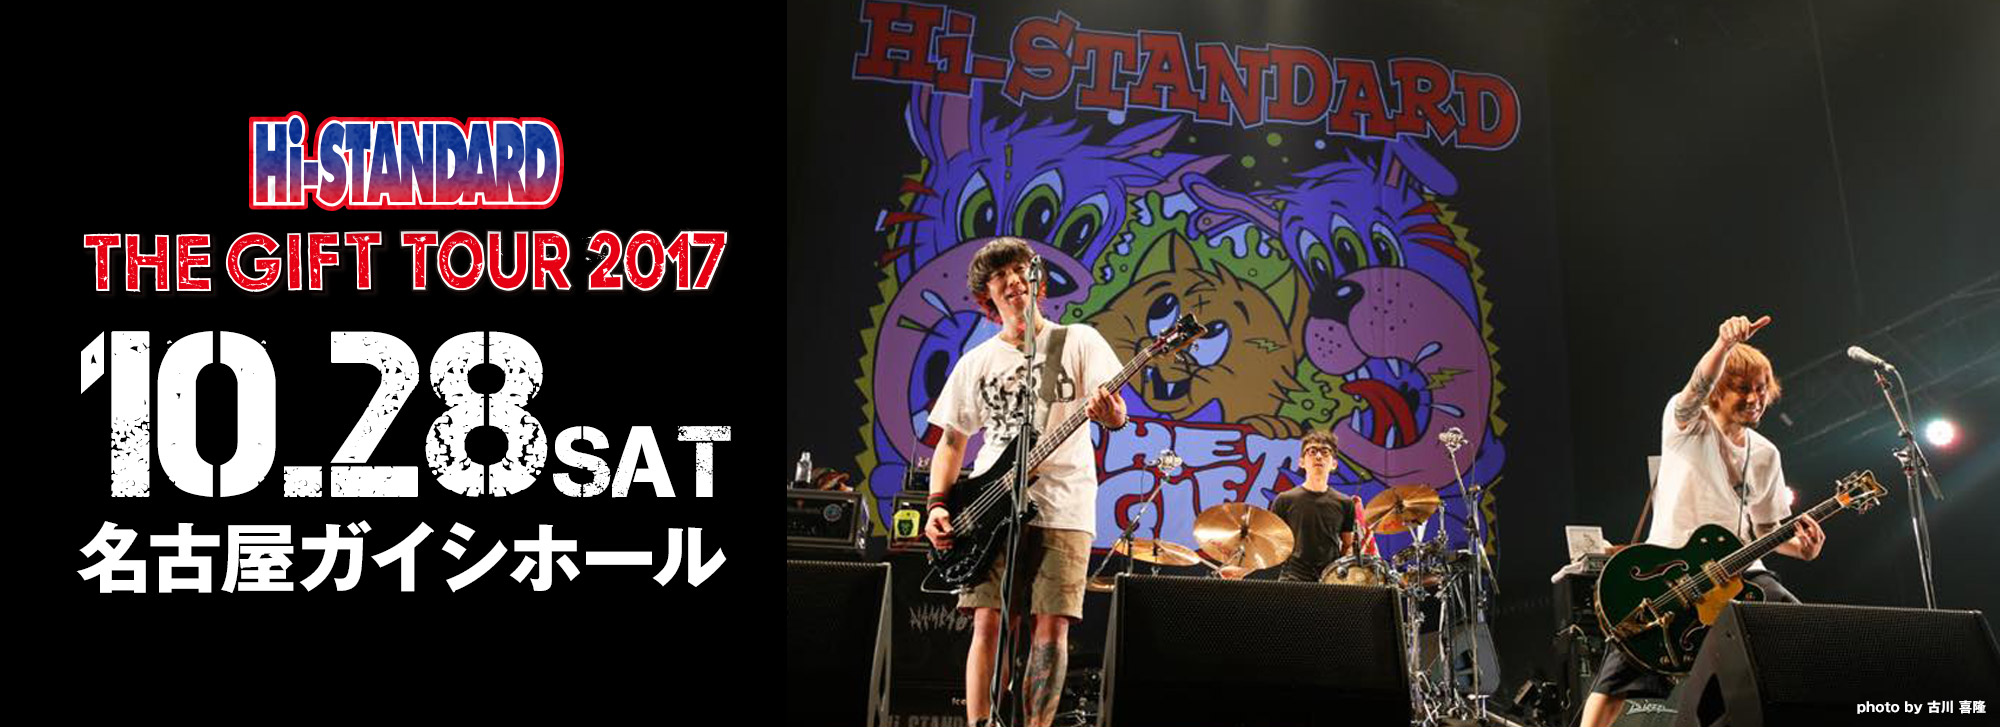 Hi-STANDARD THE GIFT TOUR 2017 10.28 SAT 名古屋ガイシホール